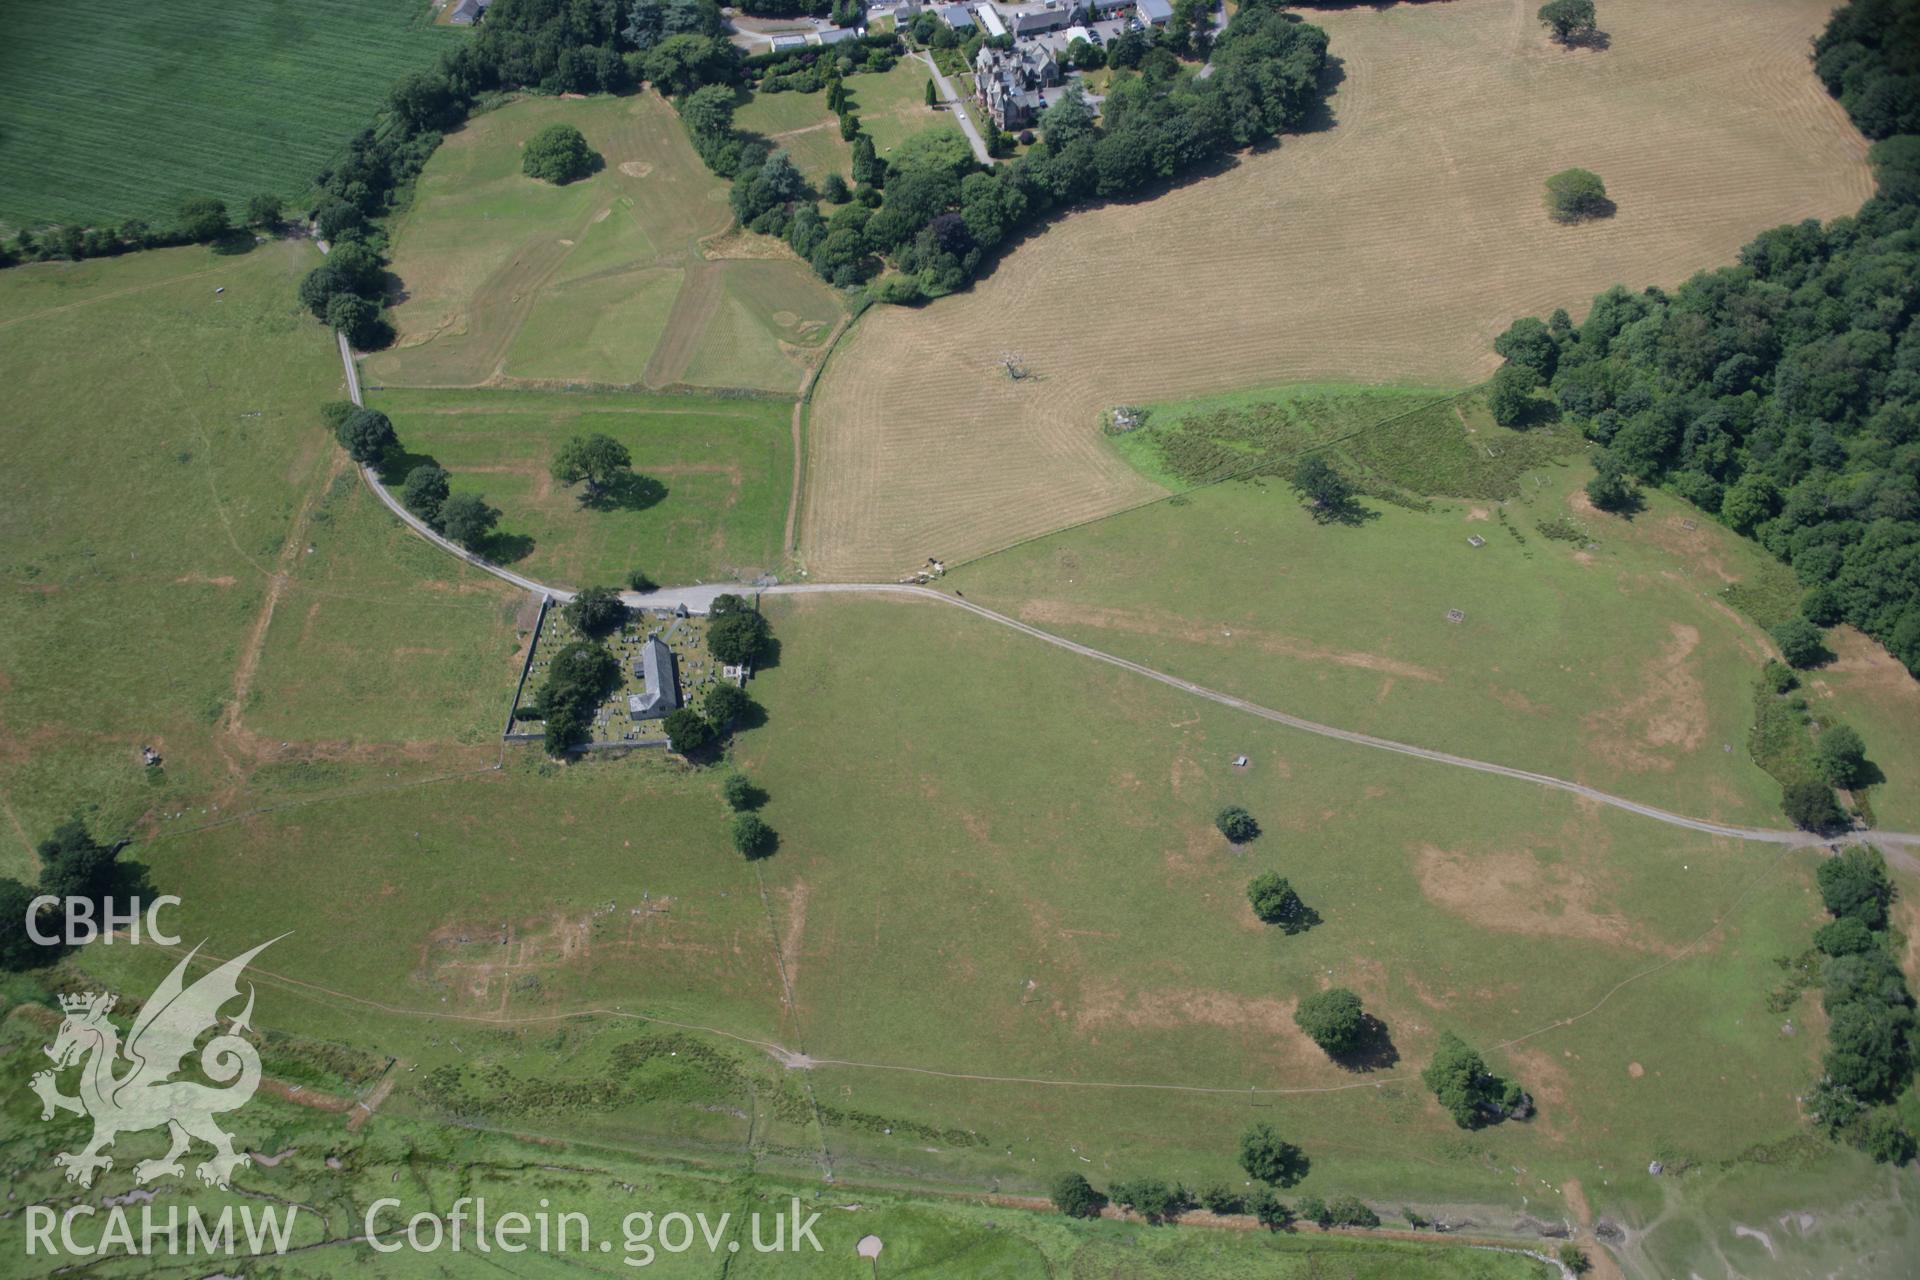 RCAHMW colour oblique aerial photograph of Kanovium (or Canovium) Roman Military Settlement at Caerhun. Taken on 25 July 2006 by Toby Driver.